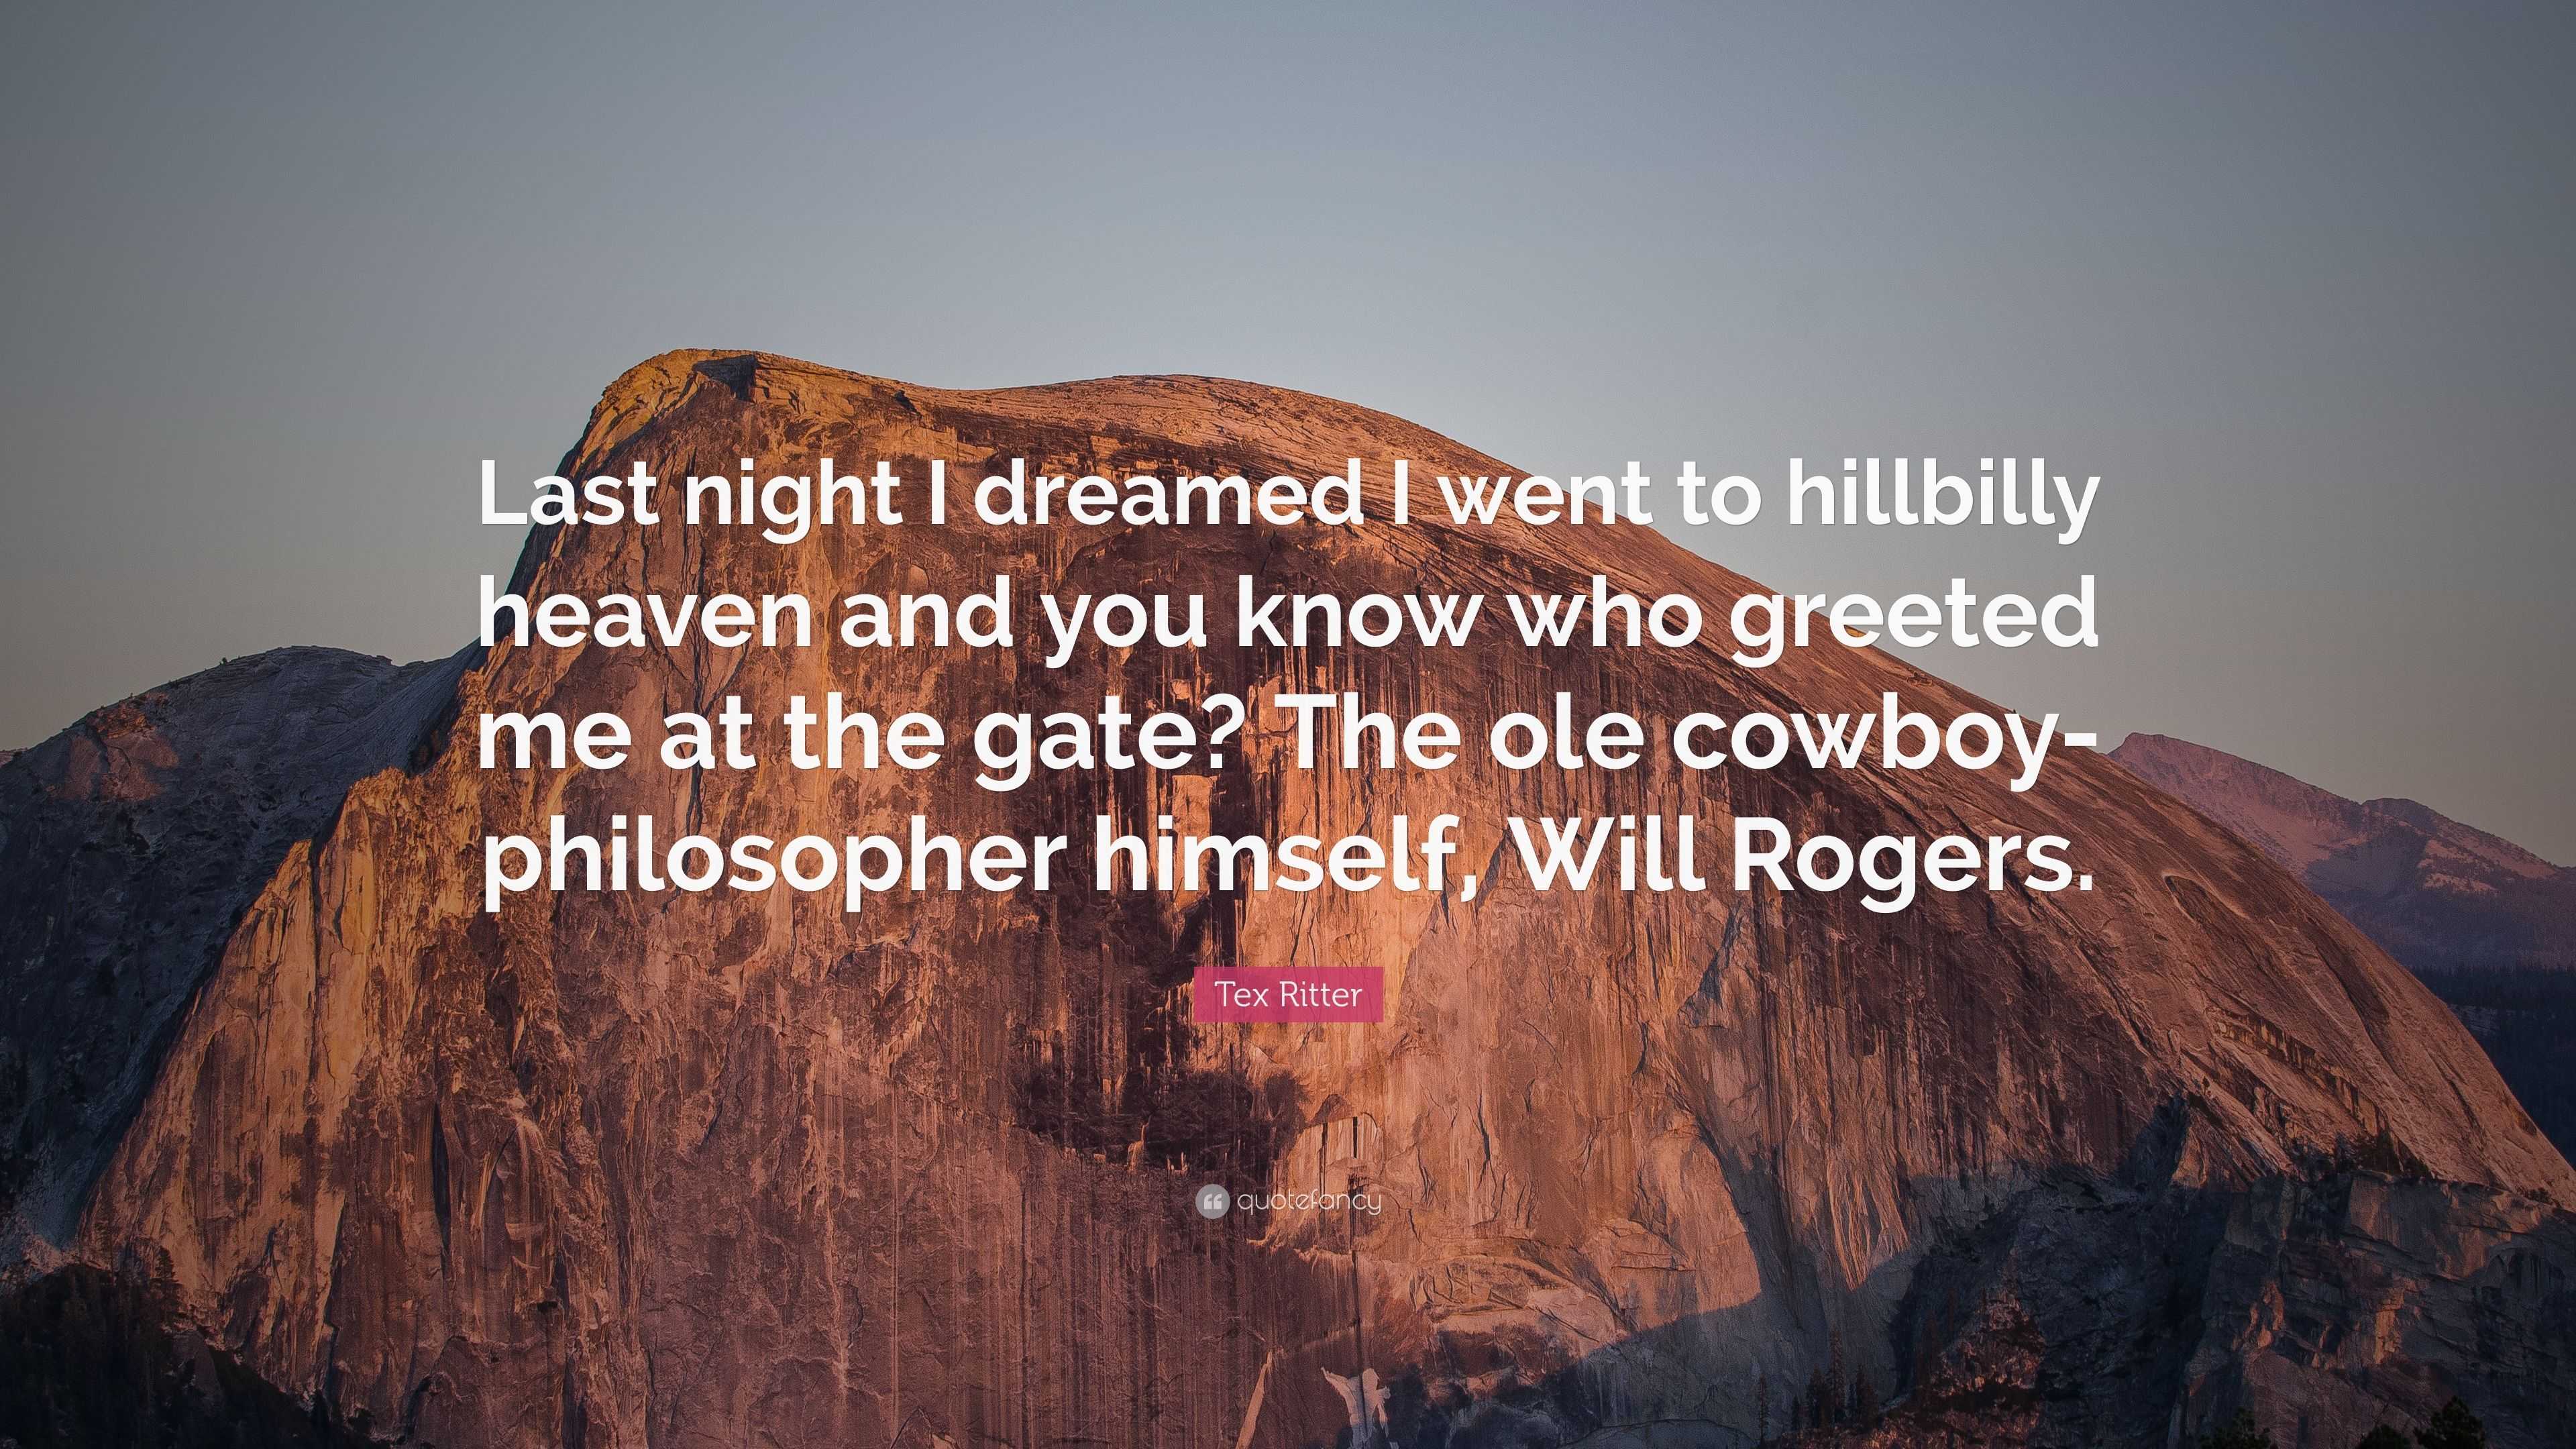 Tex Ritter Quote: “Last night I dreamed I went to hillbilly heaven and you  know who greeted me at the gate? The ole cowboy-philosopher hims”